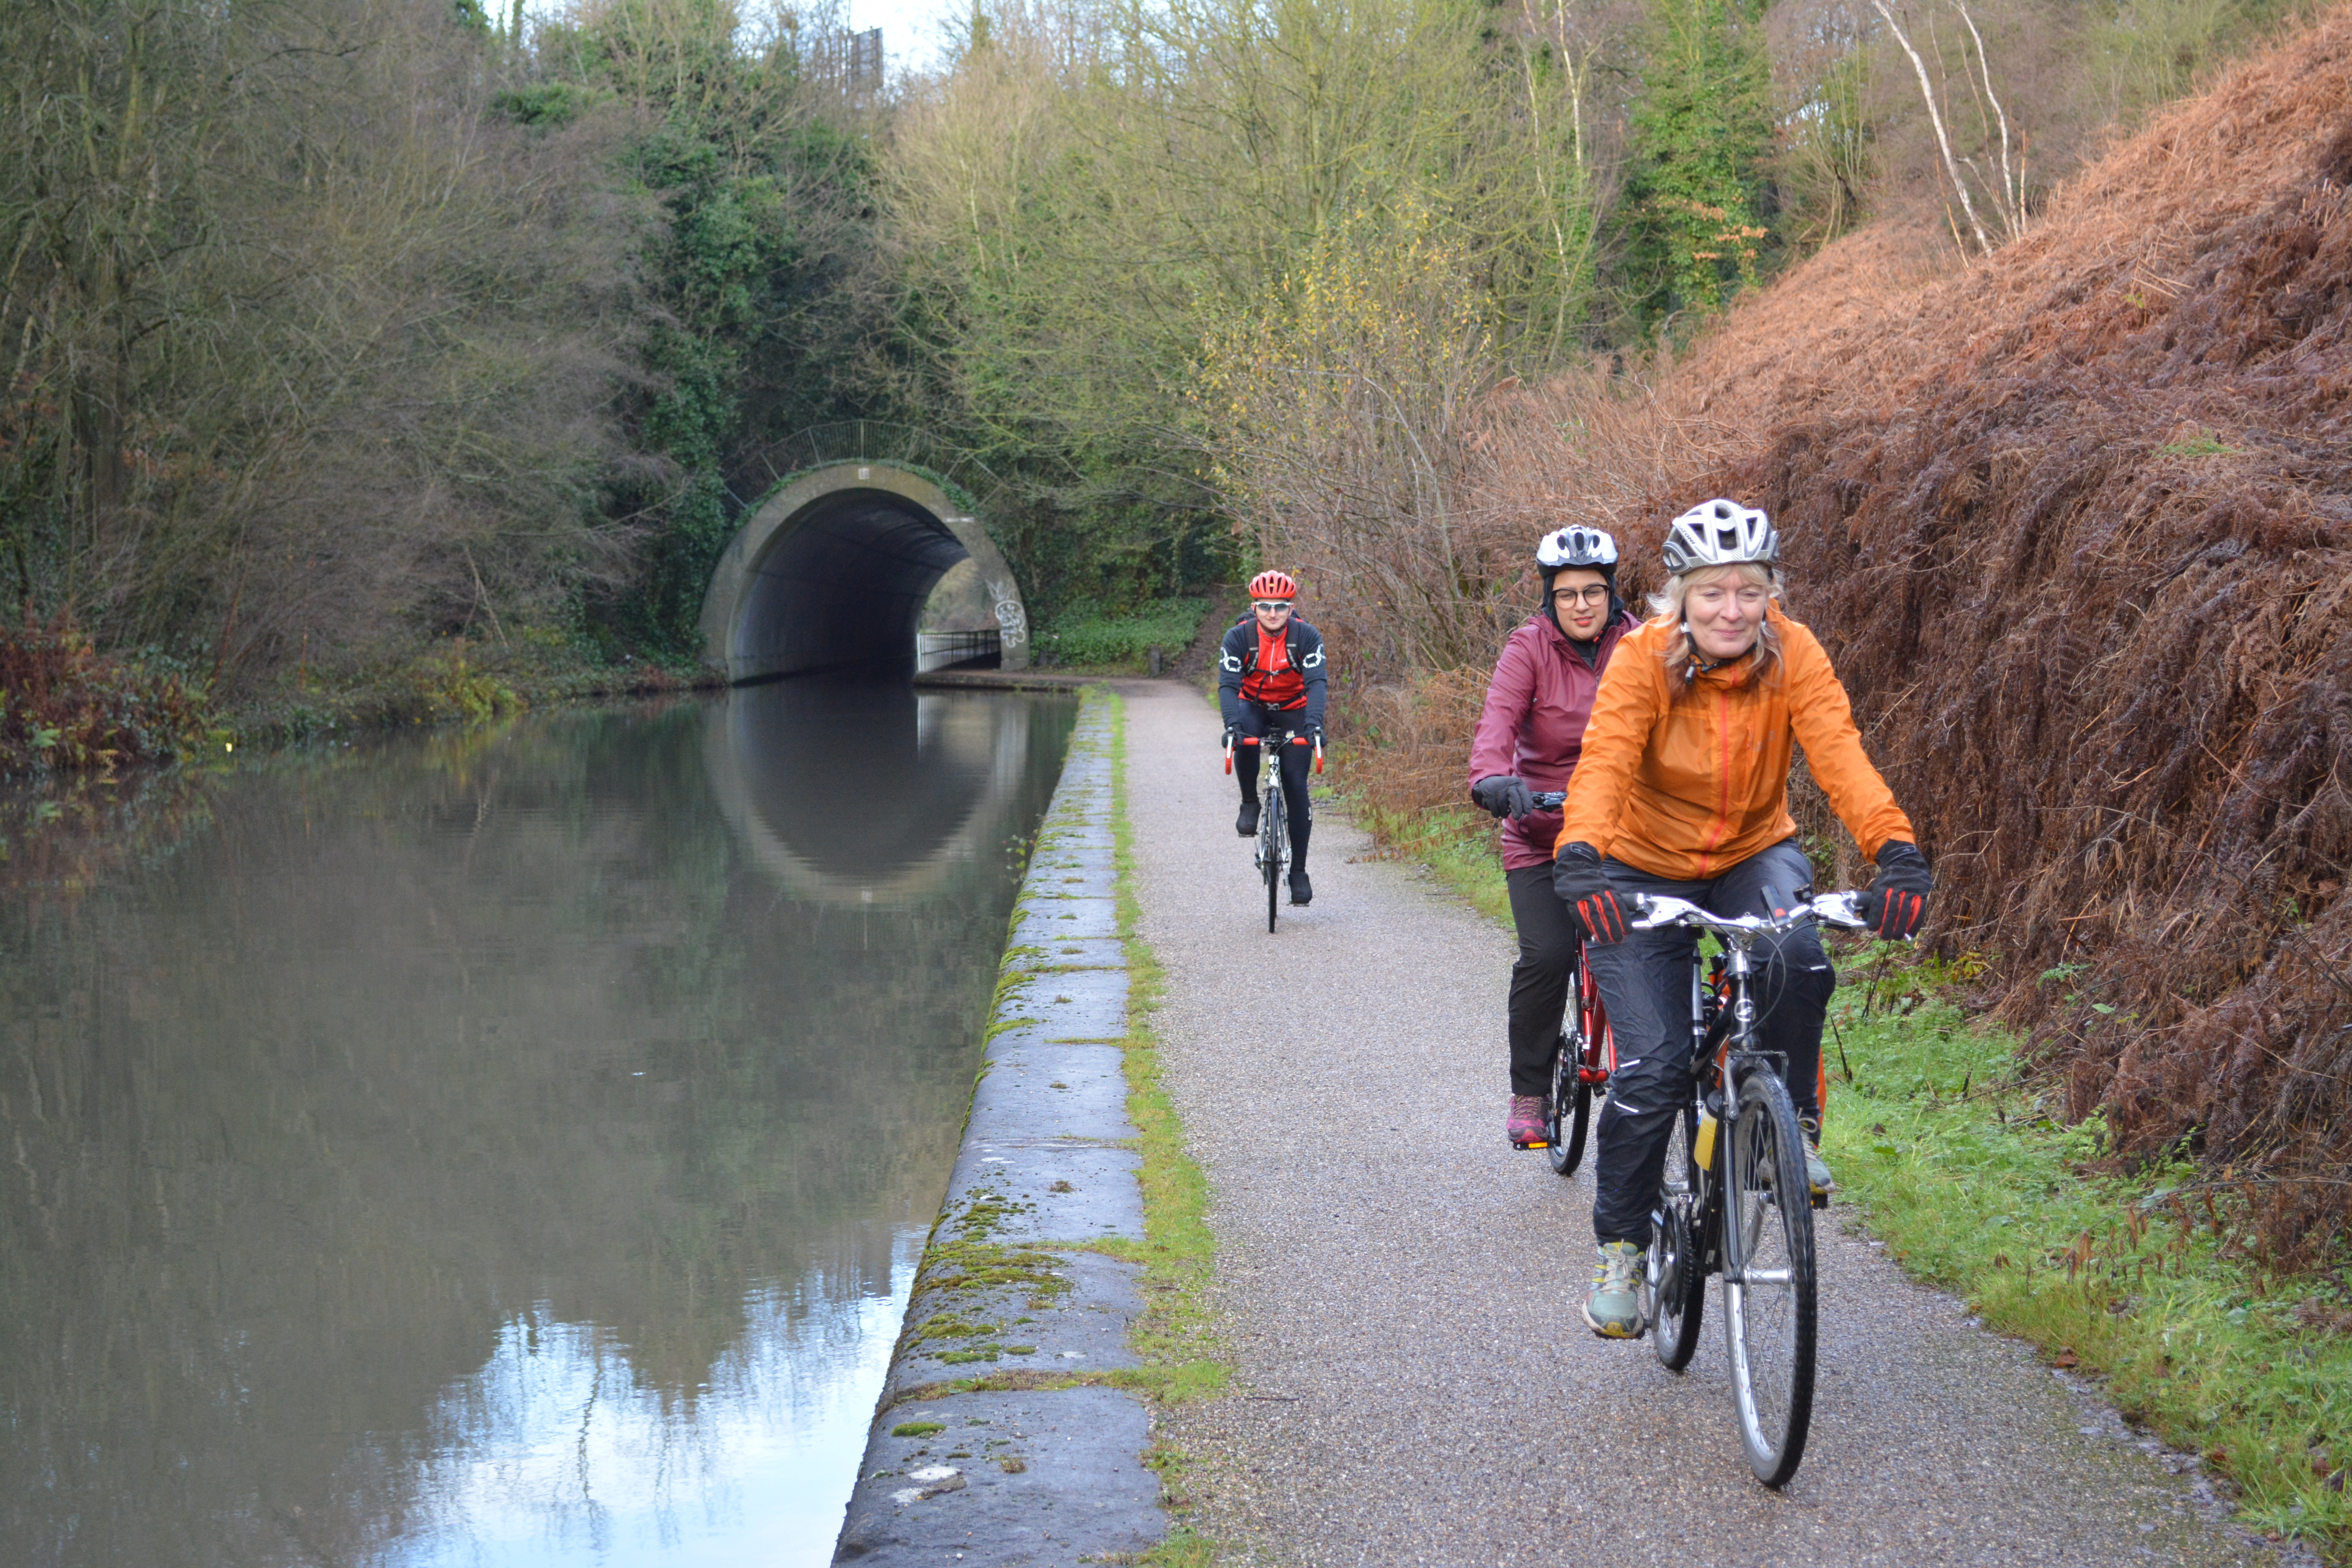 On yer bike - canal towpaths make excellent cycle ways